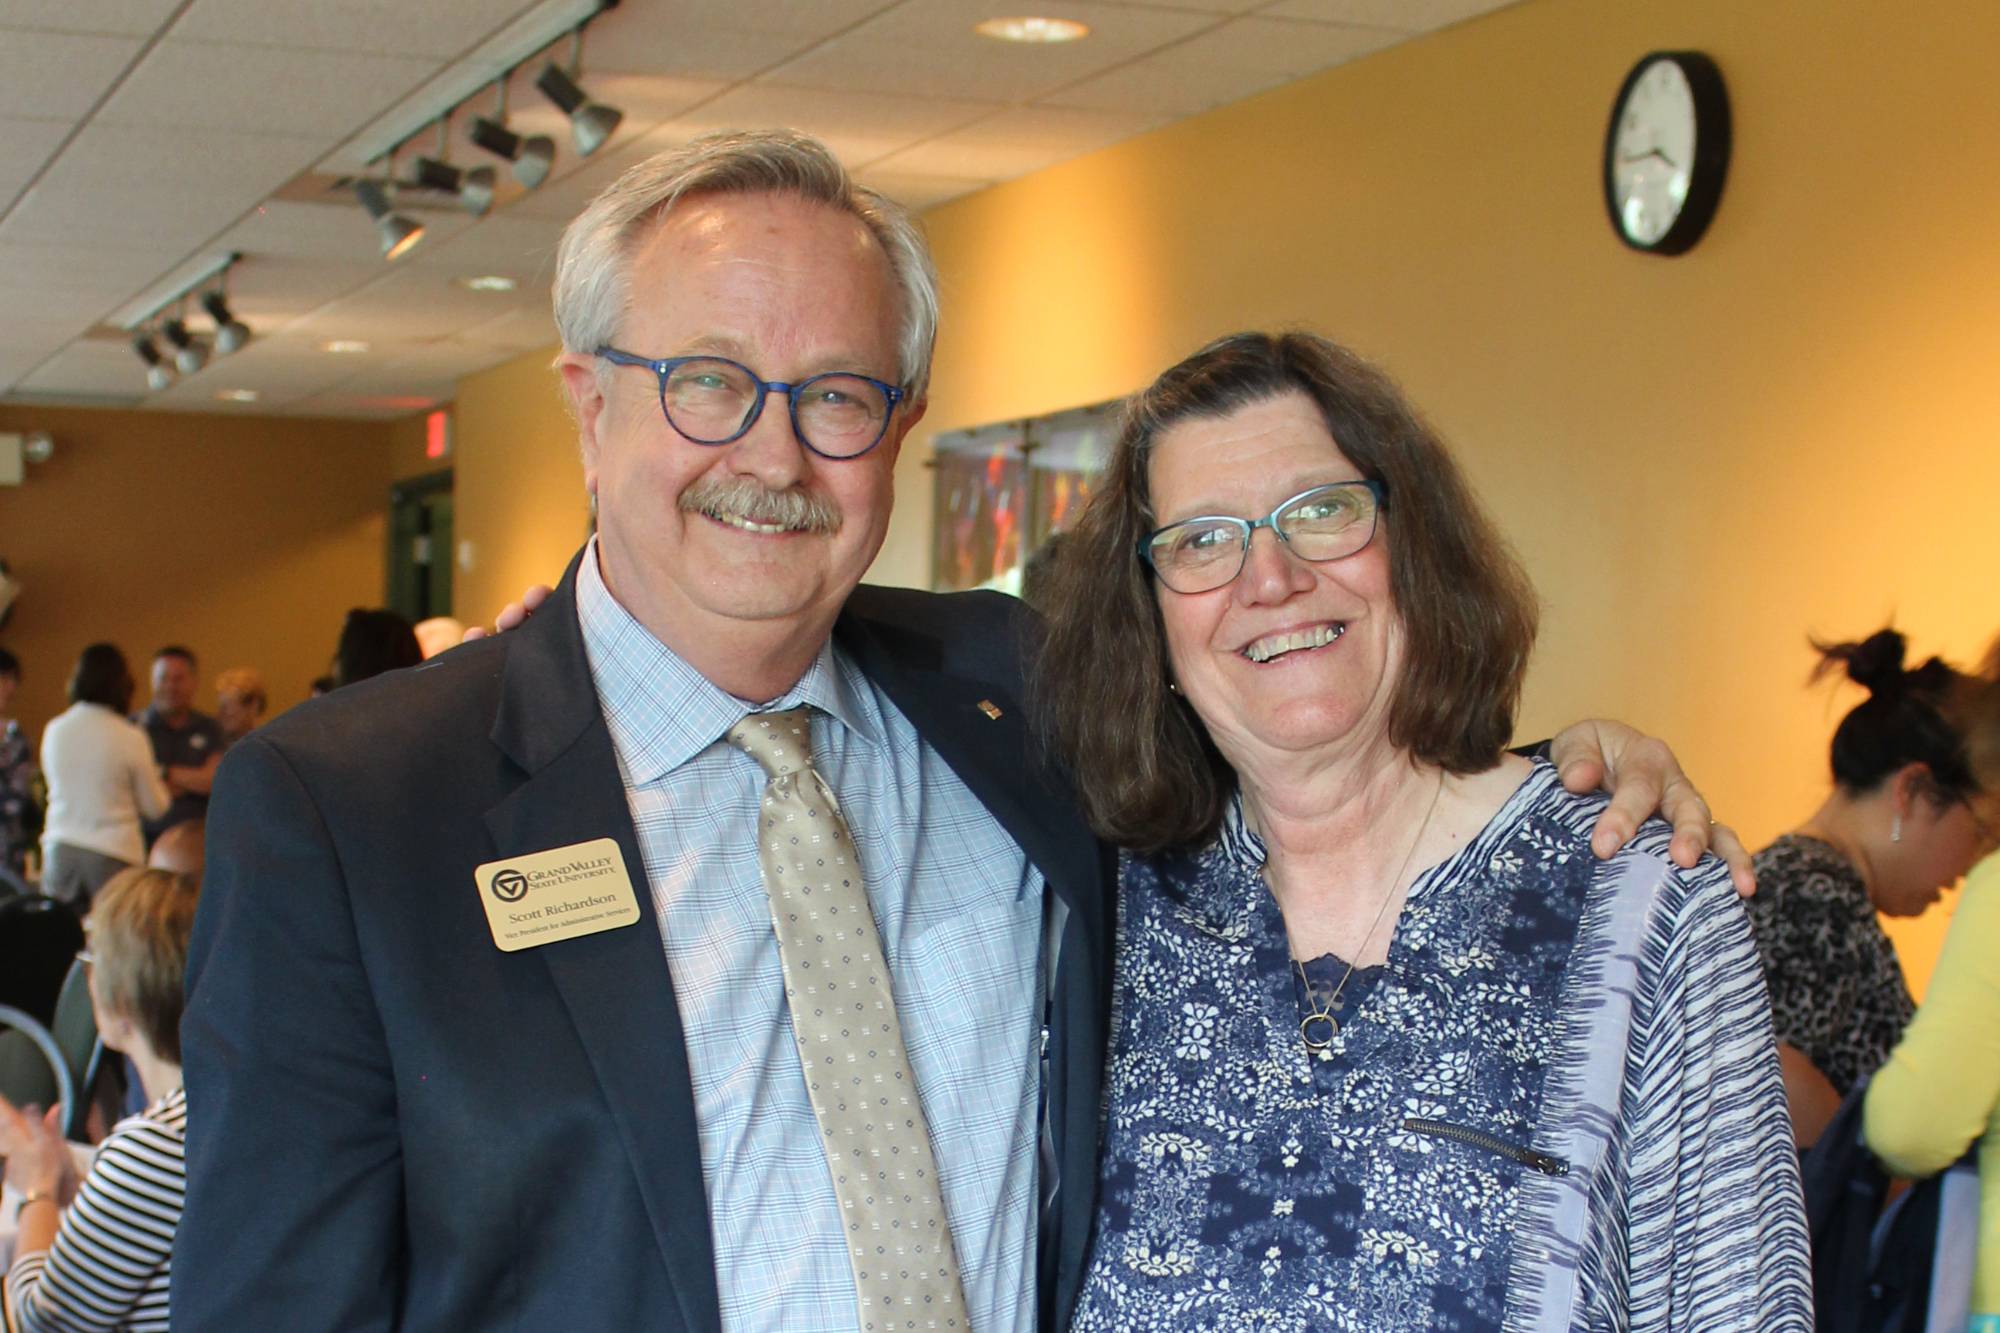 Photo of two GVSU retirees, Scott Richardson and Bonnie Maka, smiling with their arms around each other